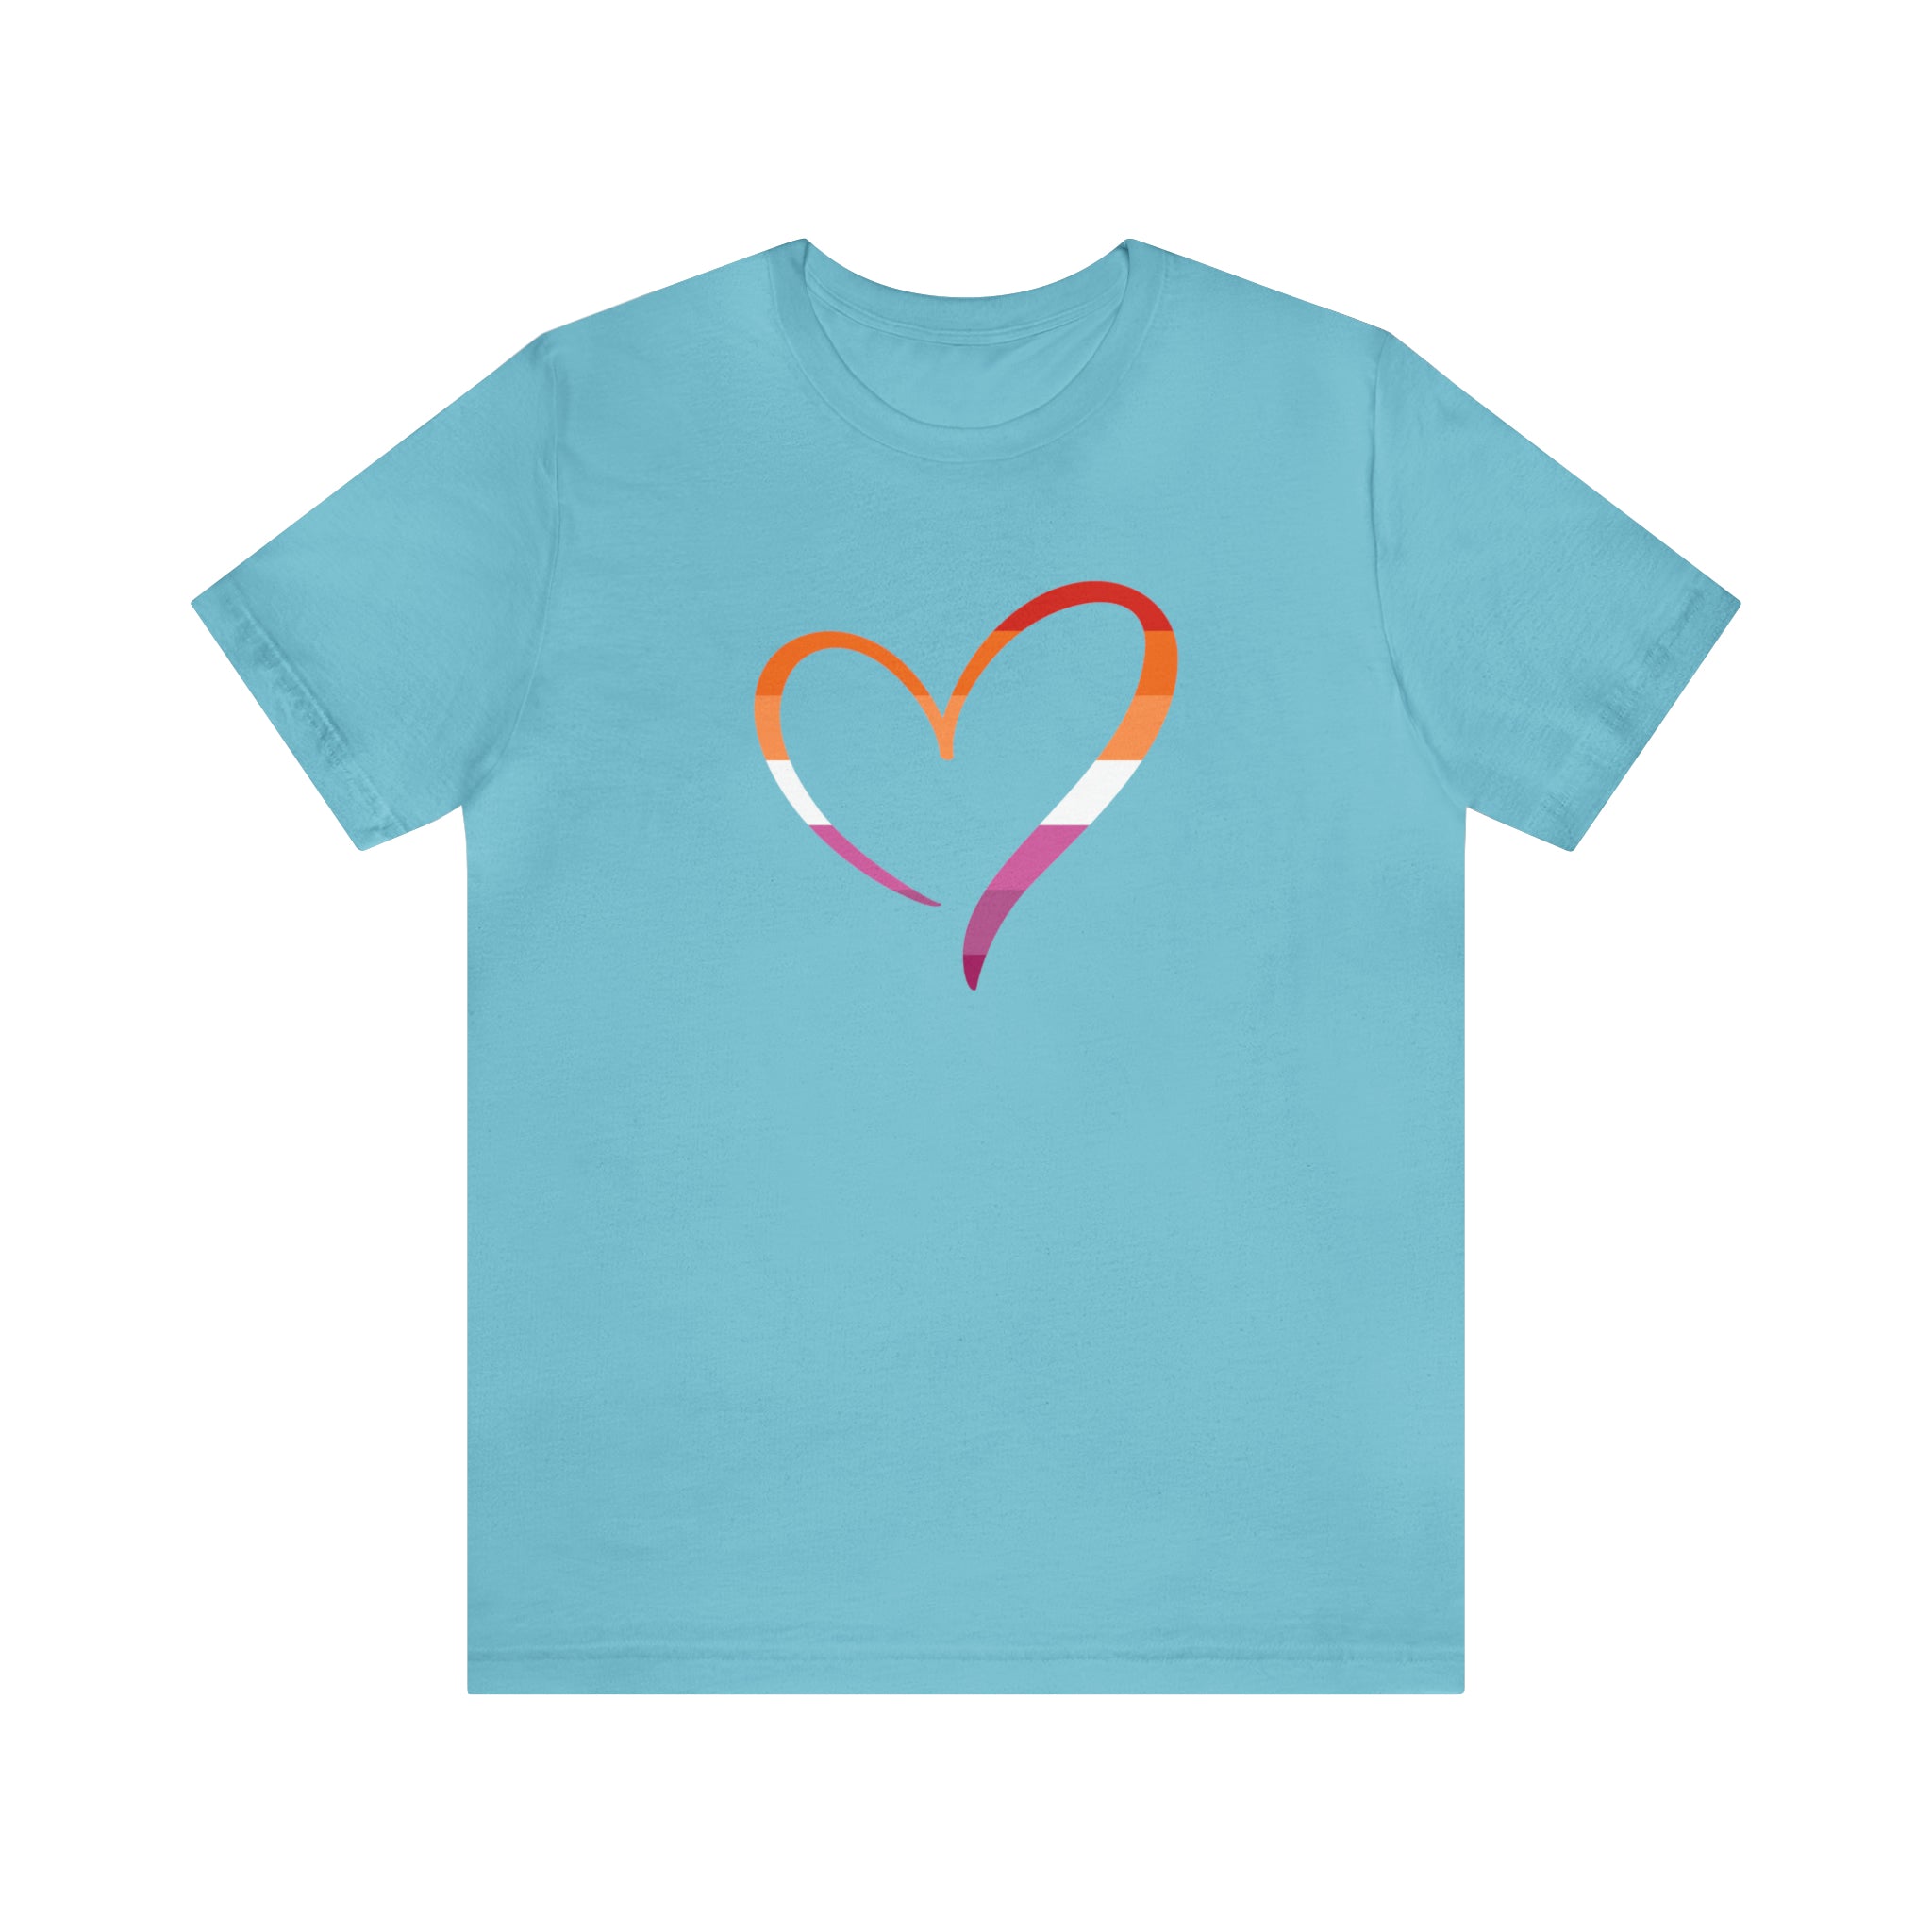 Lesbian Pride Heart Shirt By Wholesome Memes: Unisex 100% Comfy Cotton T-Shirt by Bella+Canvas